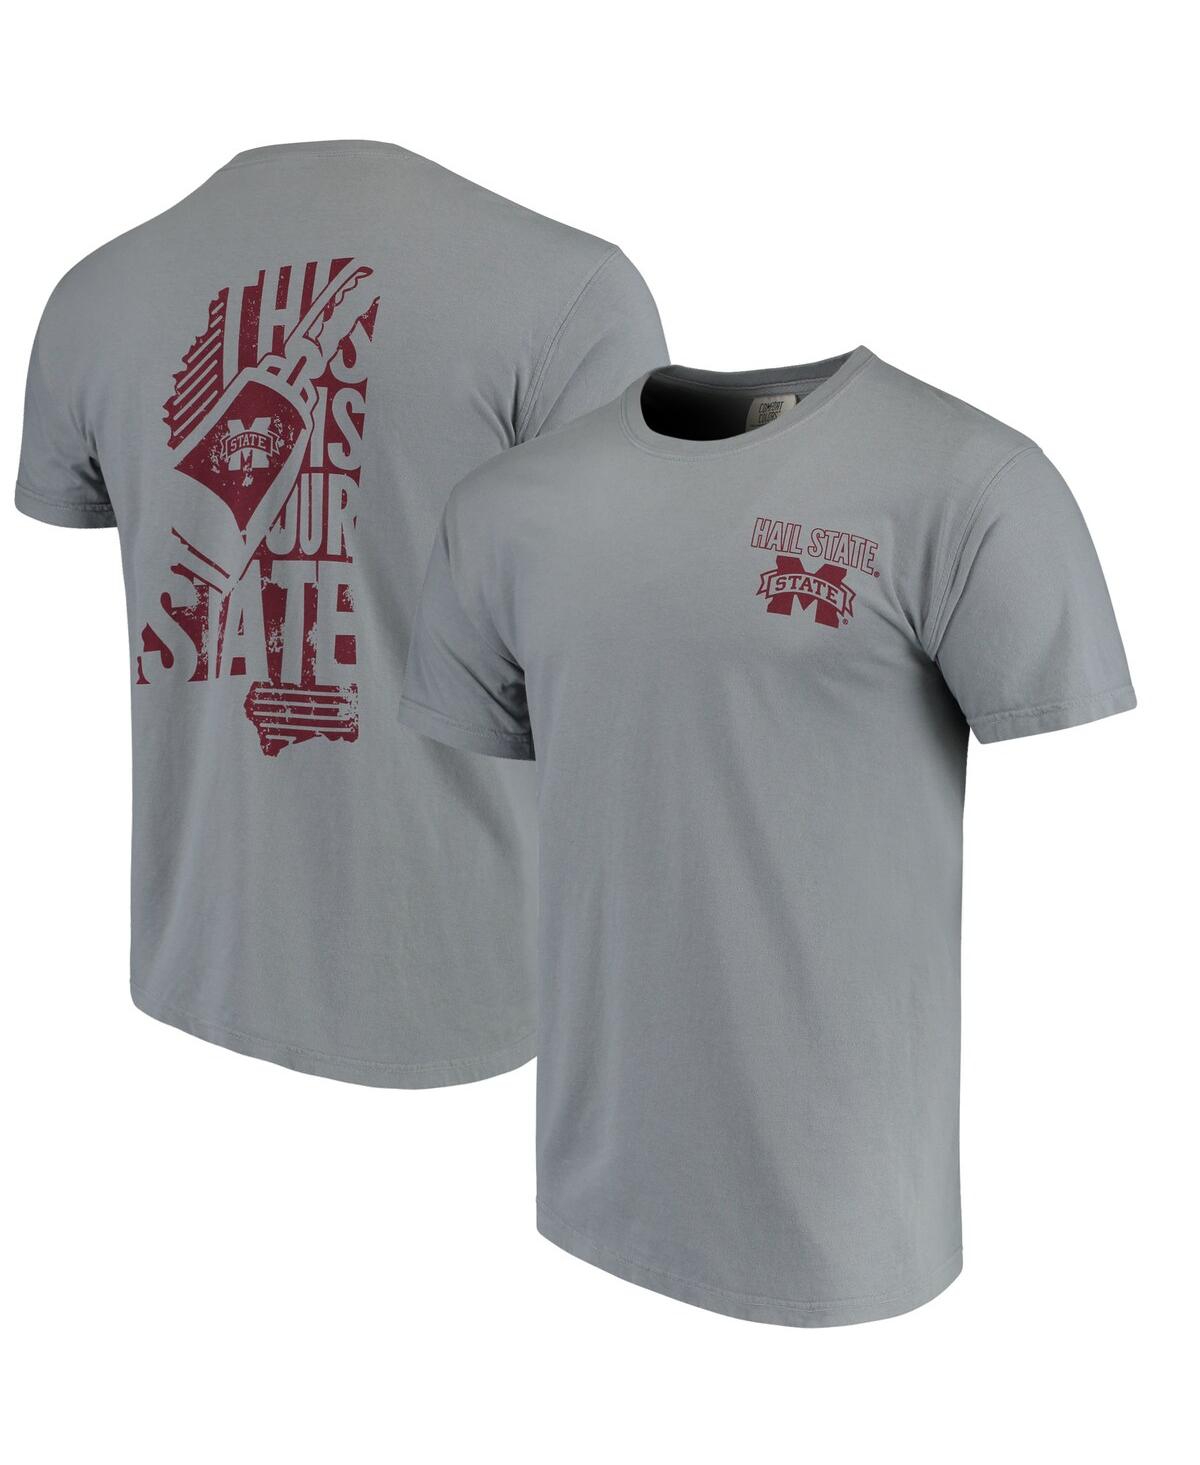 Men's Gray Mississippi State Bulldogs Phrase Local Comfort Color T-shirt - Gray